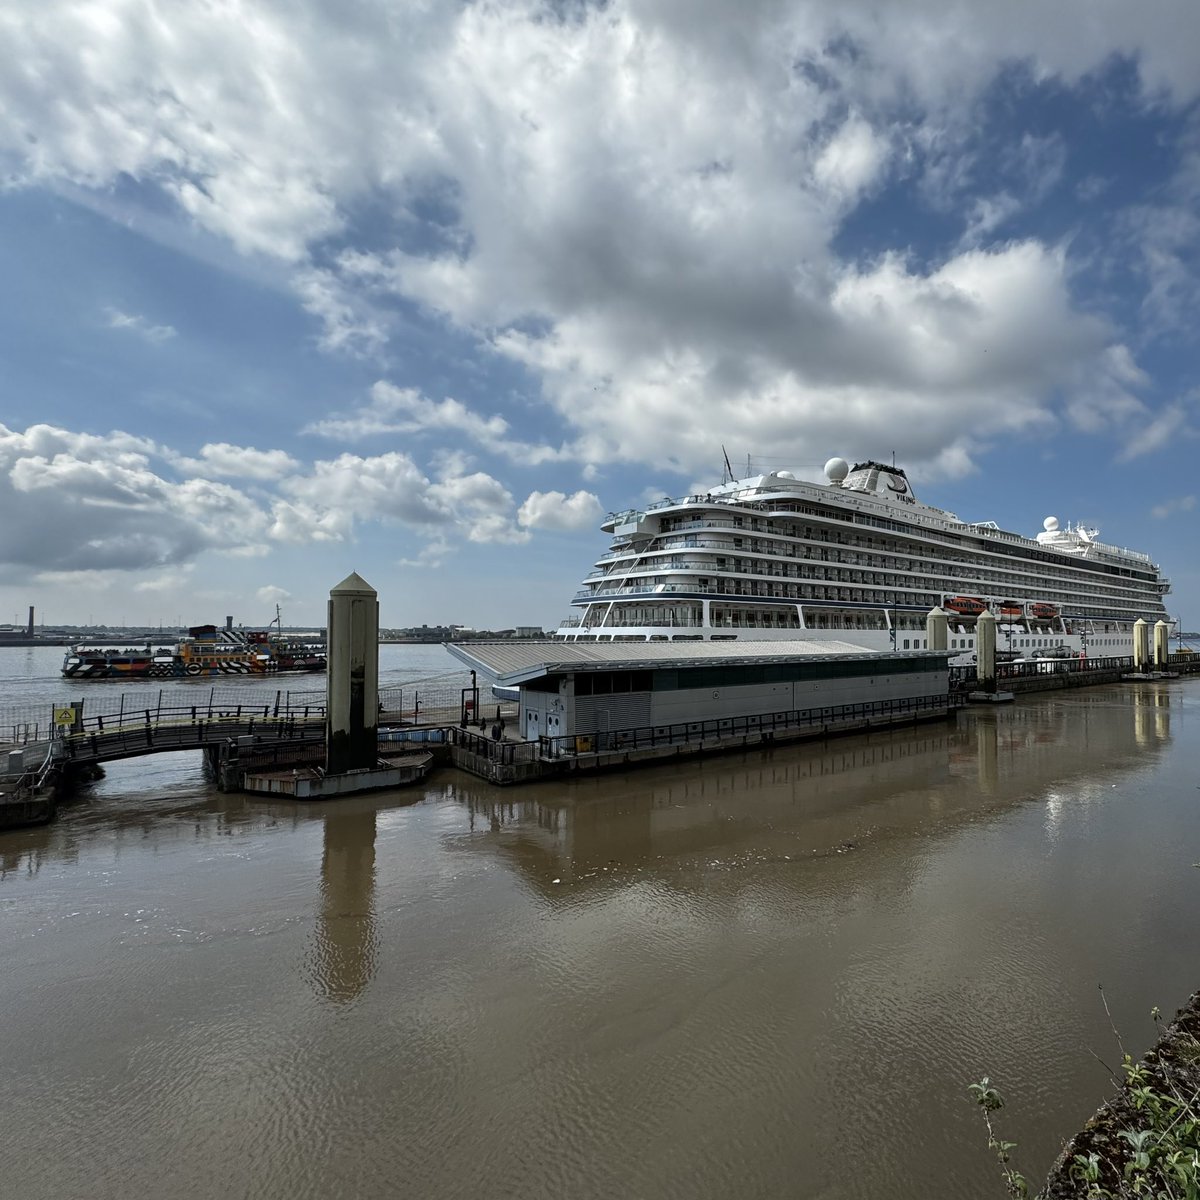 A big welcome to Viking Cruises’ Viking Saturn and her passengers to Liverpool Cruise Port today. It’s been a glorious day weather-wise. We look forward to welcoming you back again soon.

#cruiseaddict #lovecruising #cruiselife #cruisevlogger #cruisevlog #holiday #travel